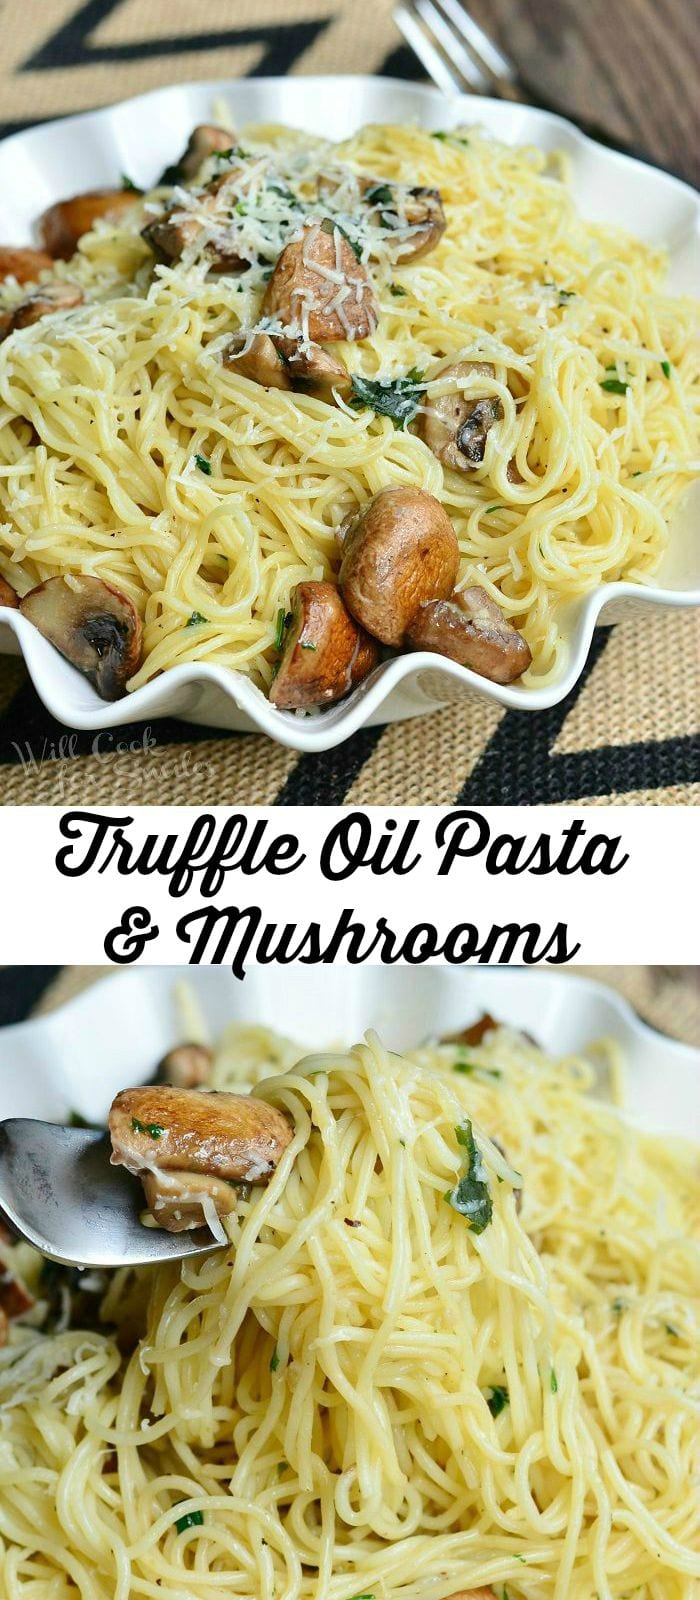 Truffle Pasta and Mushrooms in a white bowl photo collage 